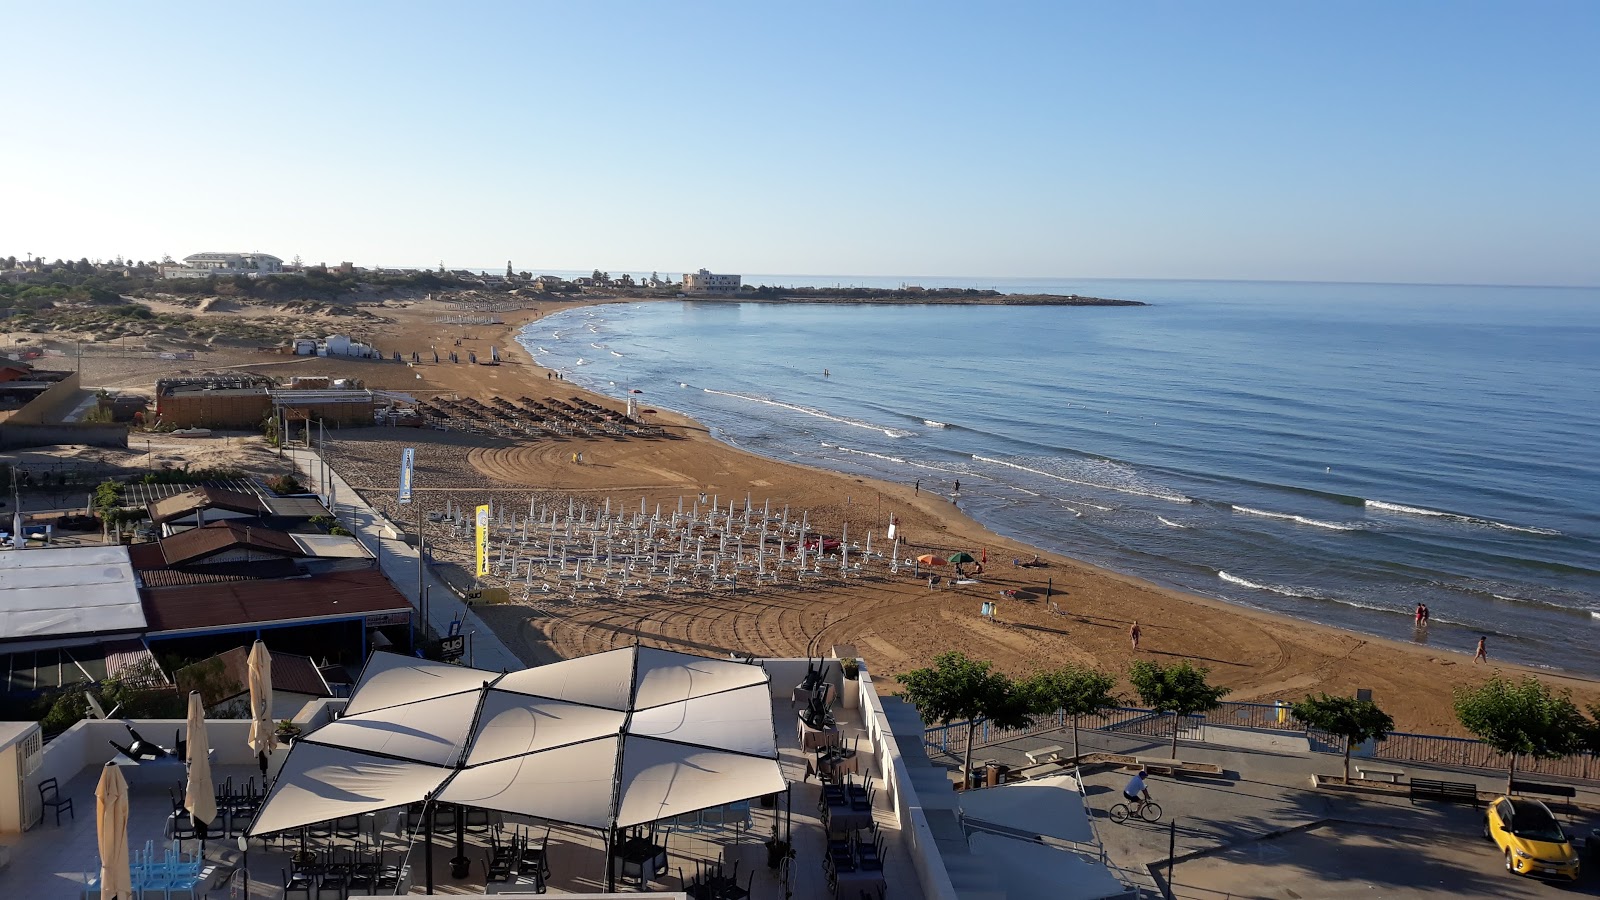 Photo of Marina di Modica - popular place among relax connoisseurs